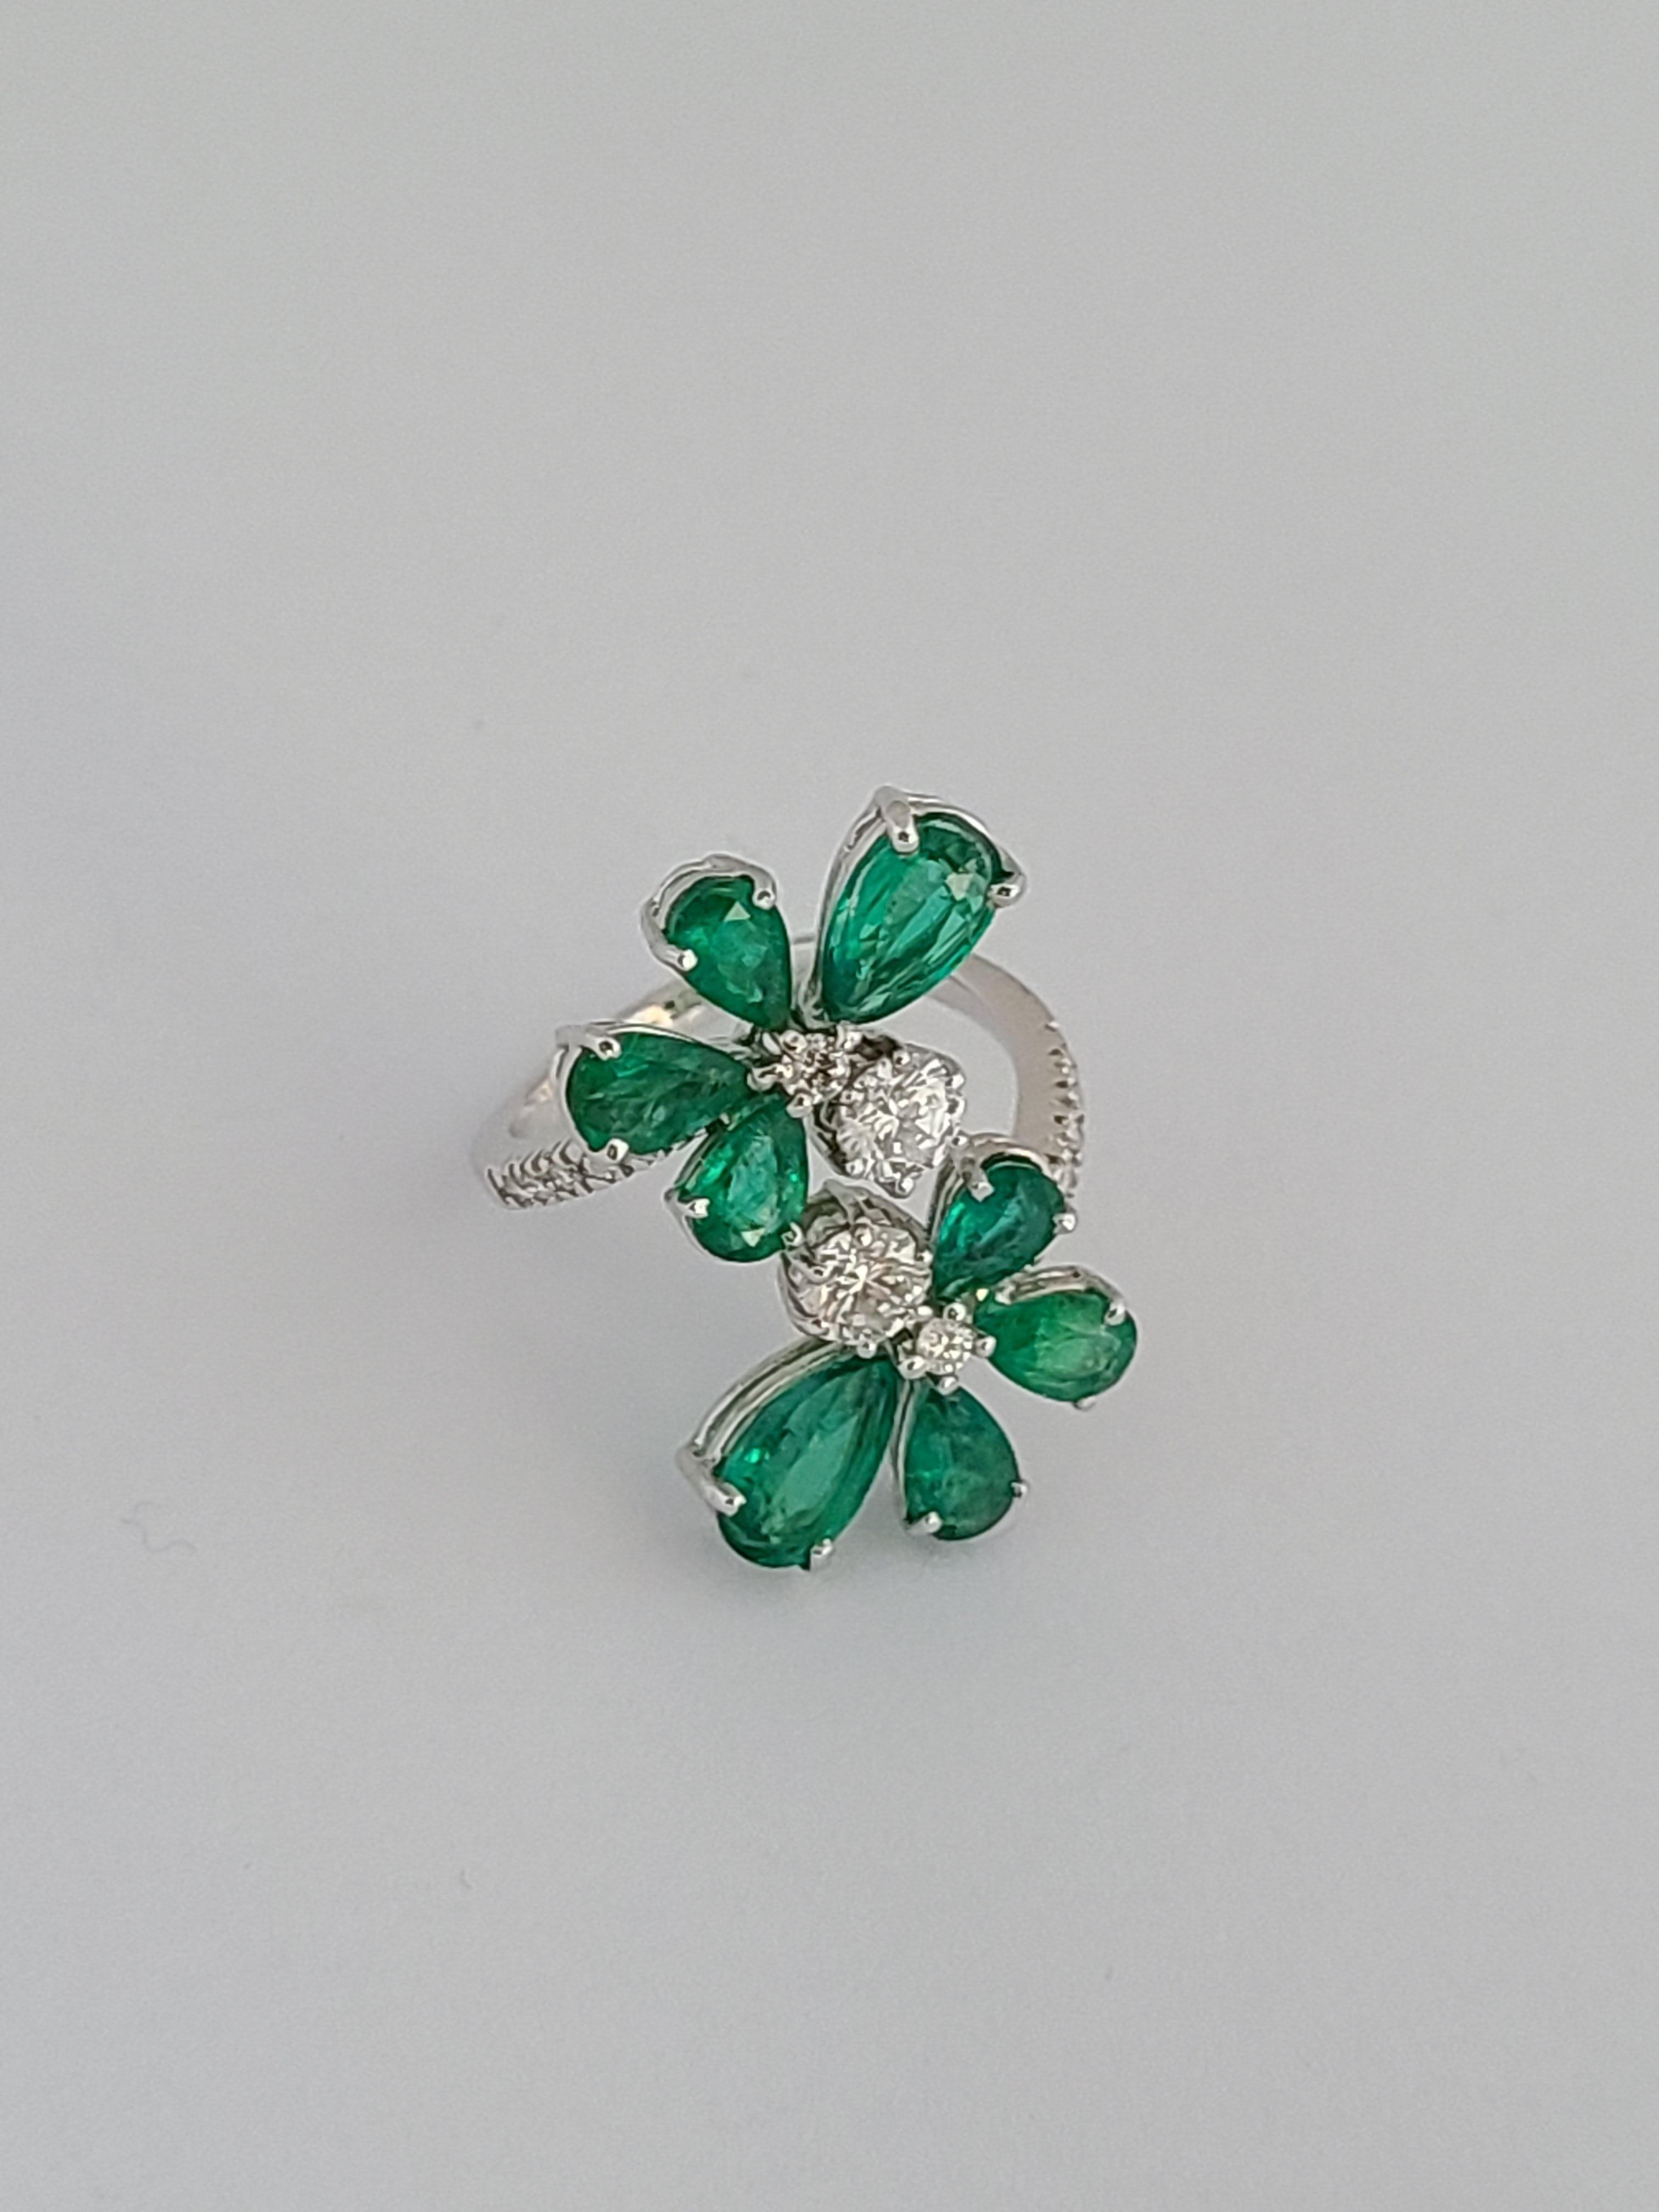 A modern and chic emerald ring set in 18k white gold with diamonds. The emerald are natural and originate from Zambia , weight of emerald is 3.32 carats and diamond weight is .84 carats. The ring dimensions in cm 2.6 x 2.6 x 2.3 (LXWXH). US 6